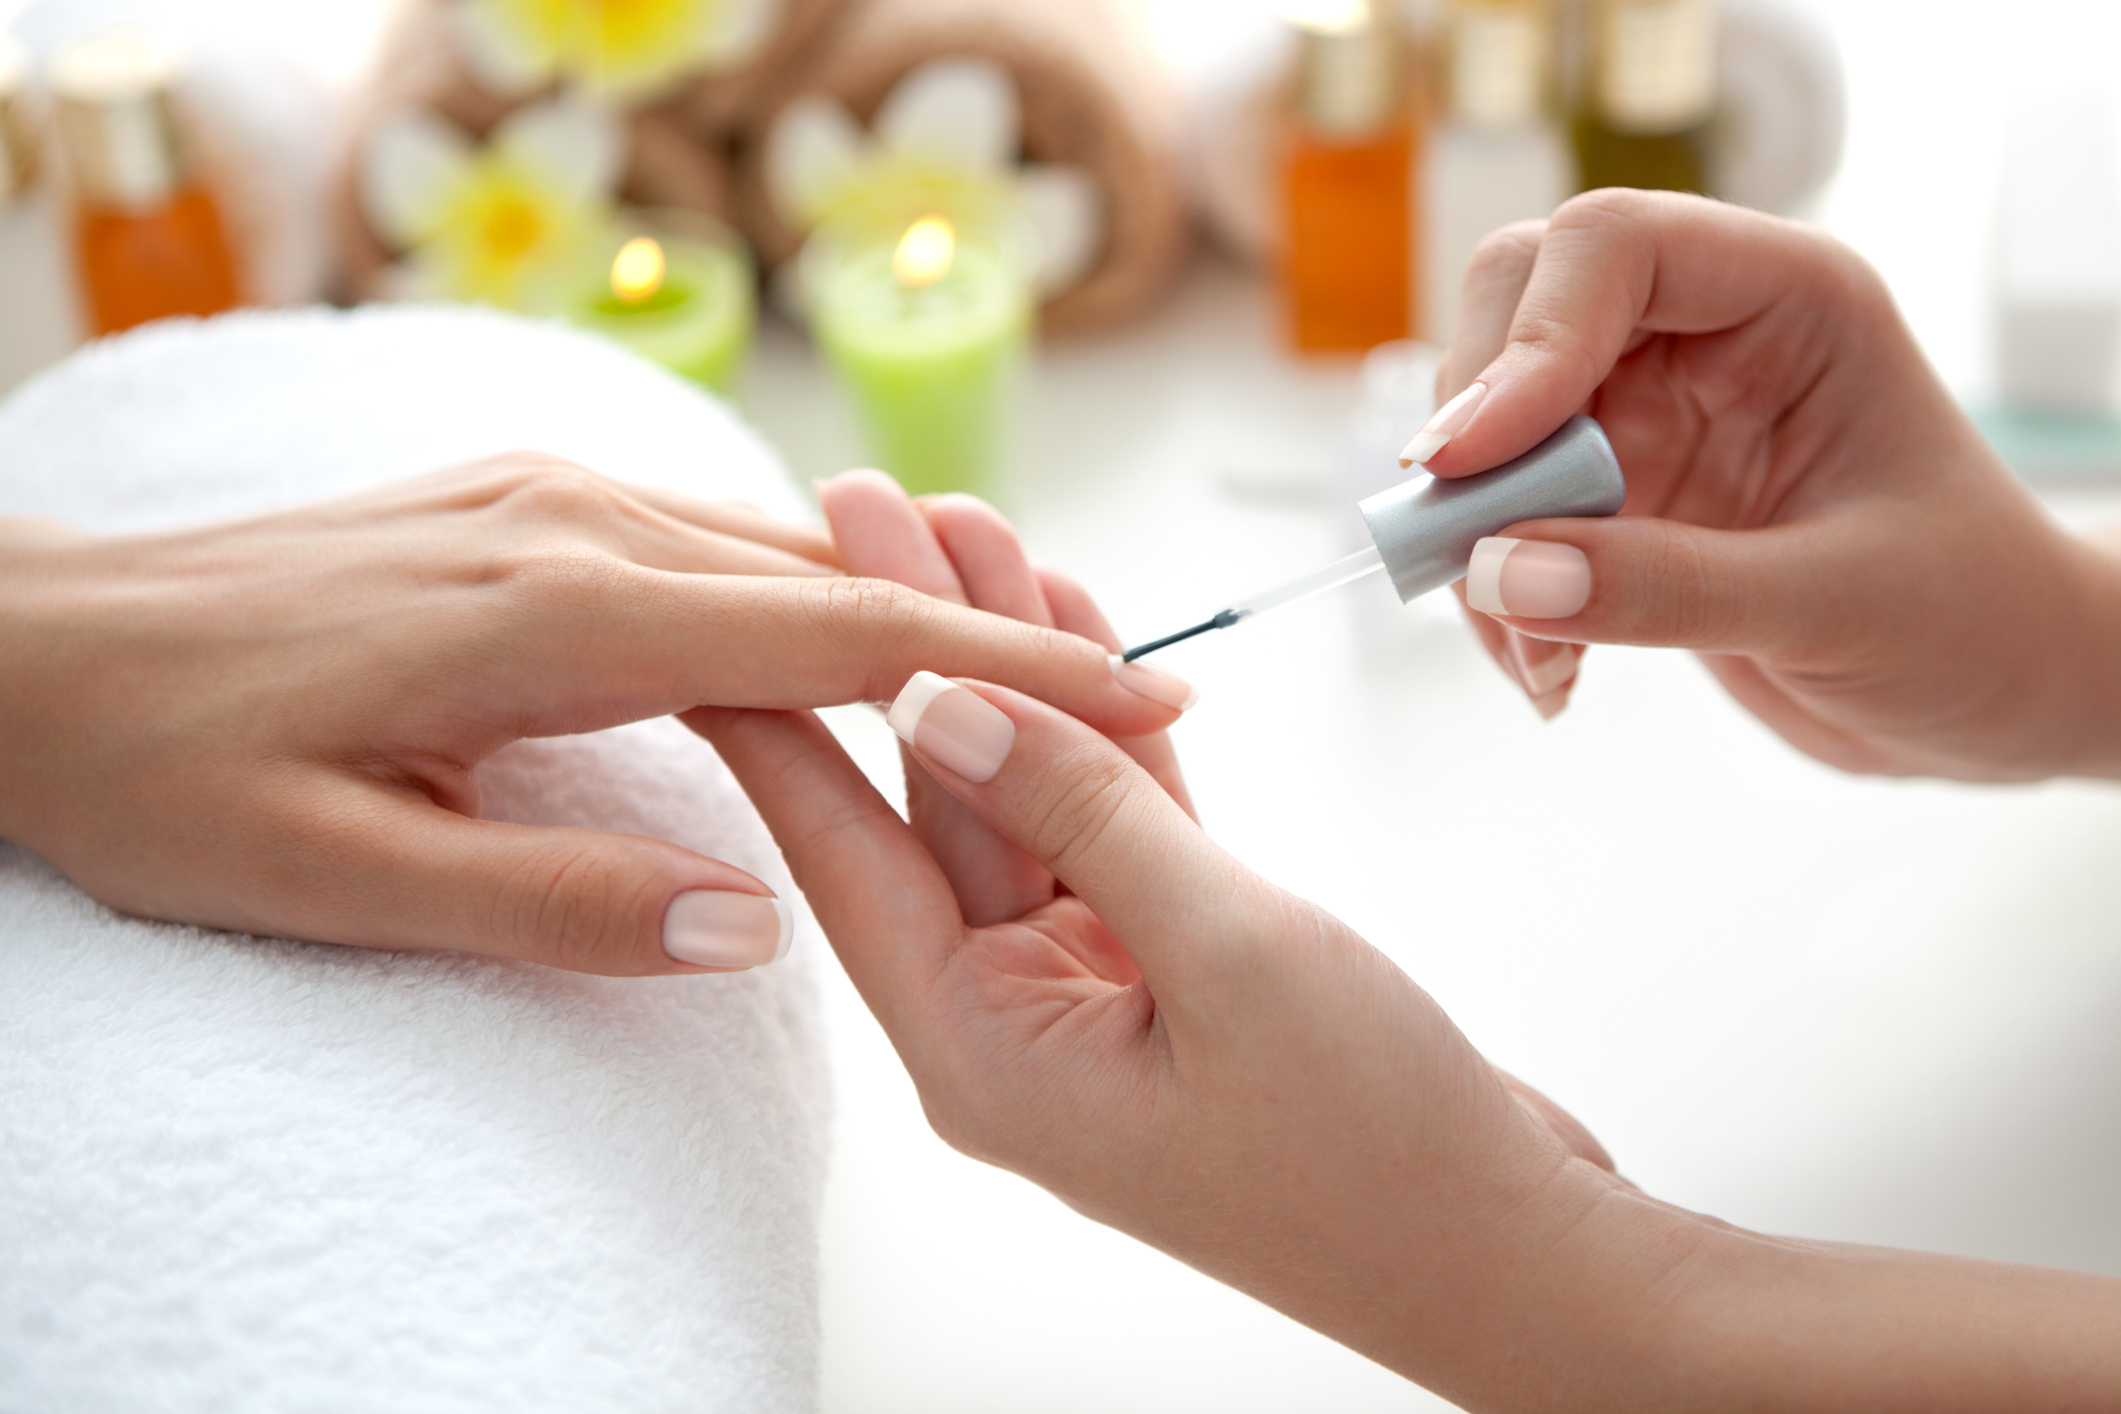 Beauty and Grooming Services: Pamper Yourself at Sagewood in Houston!